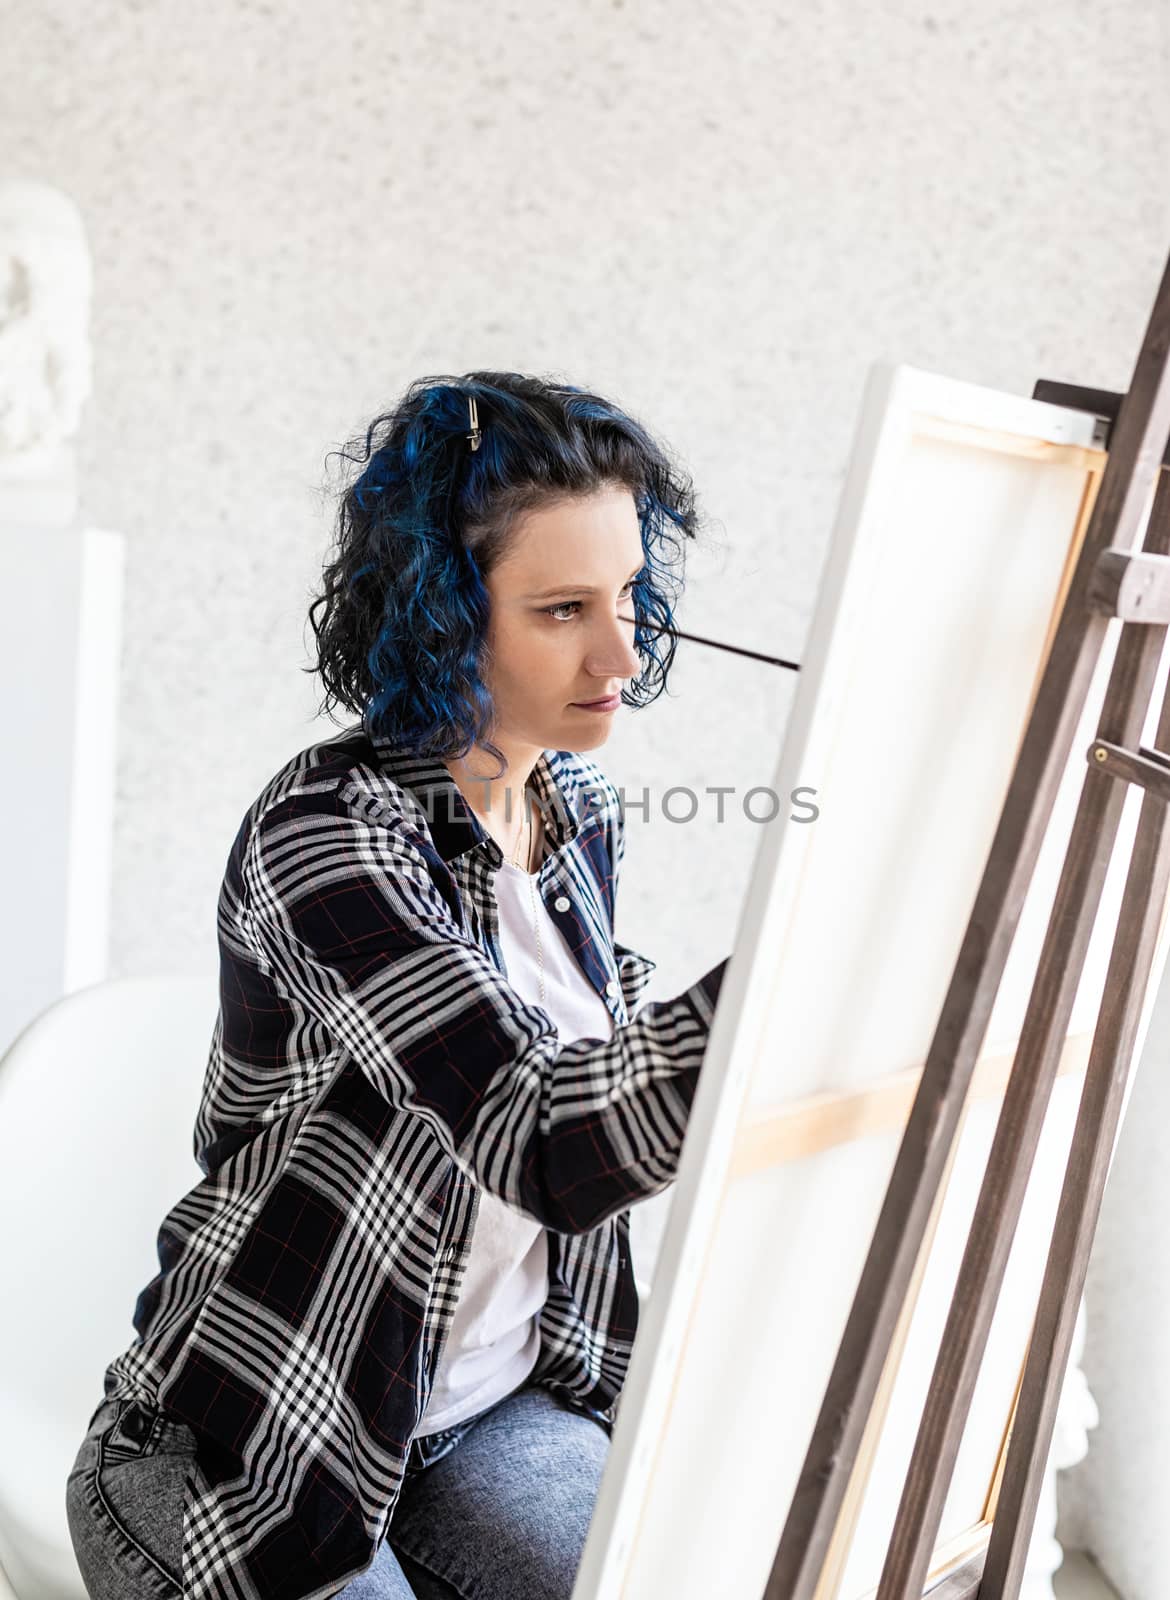 Creative woman artist painting a picture working in her studio